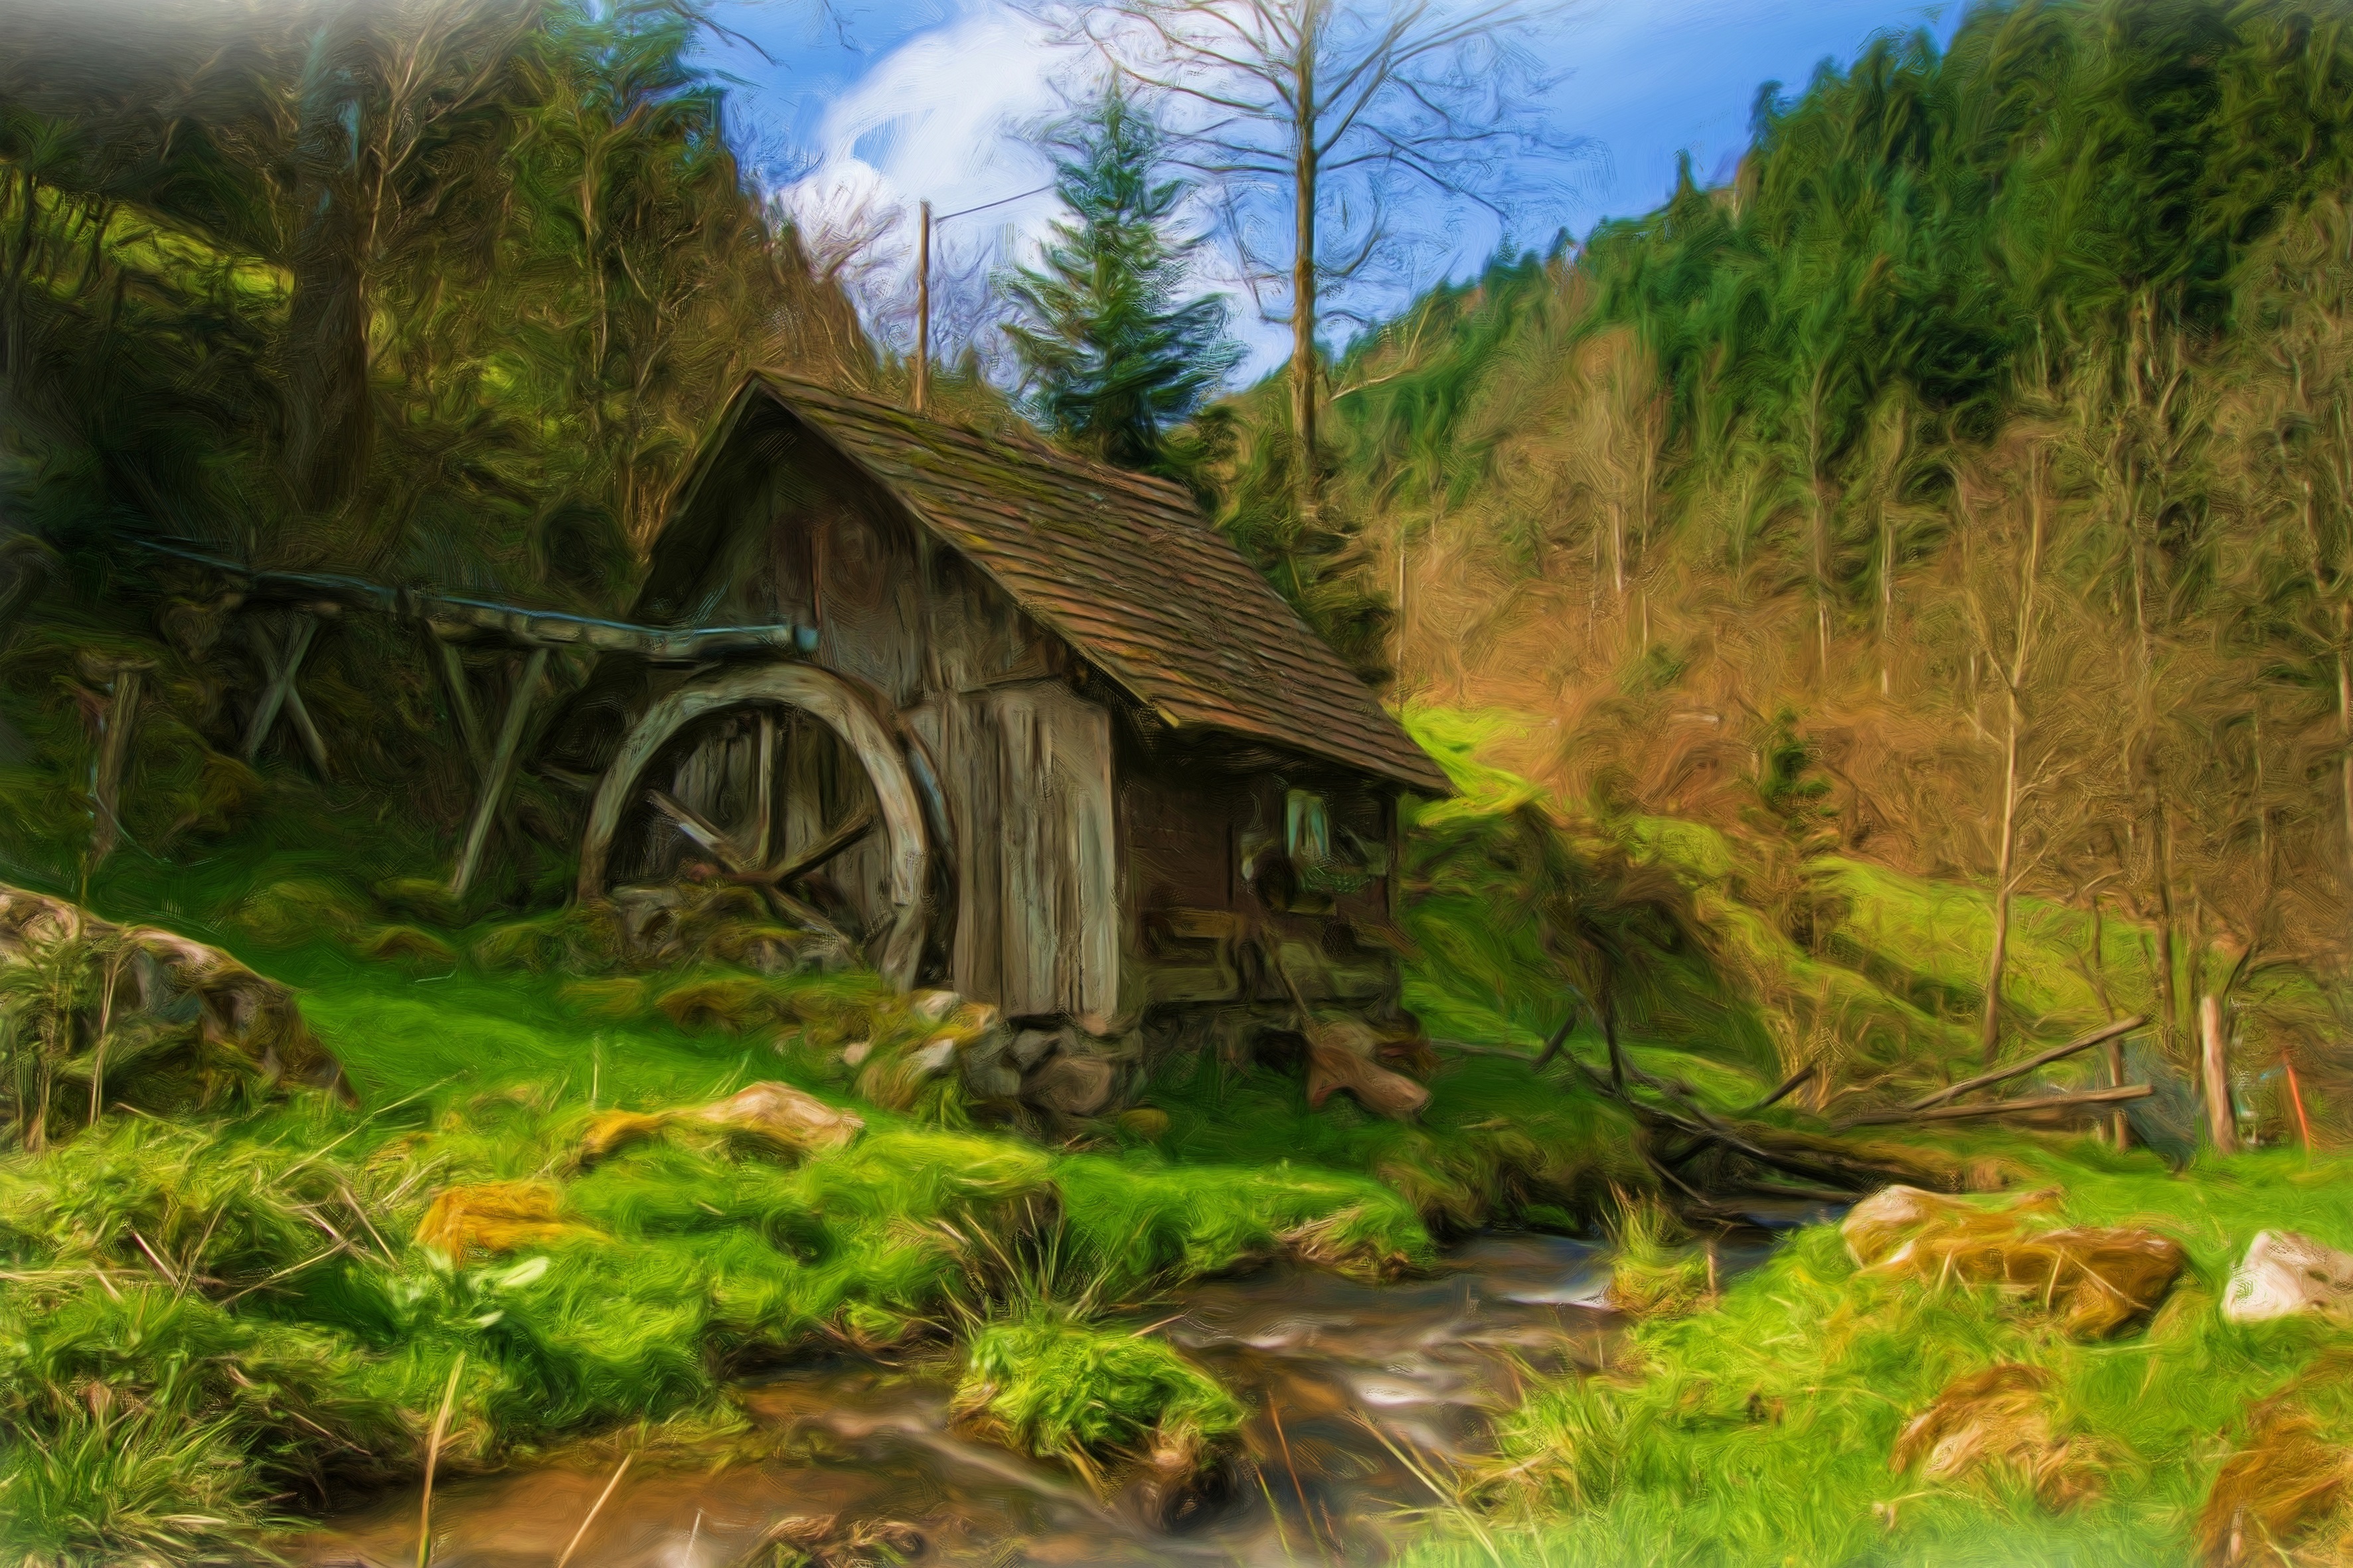 A Watermill done with an oil paint filter by Hans Benn